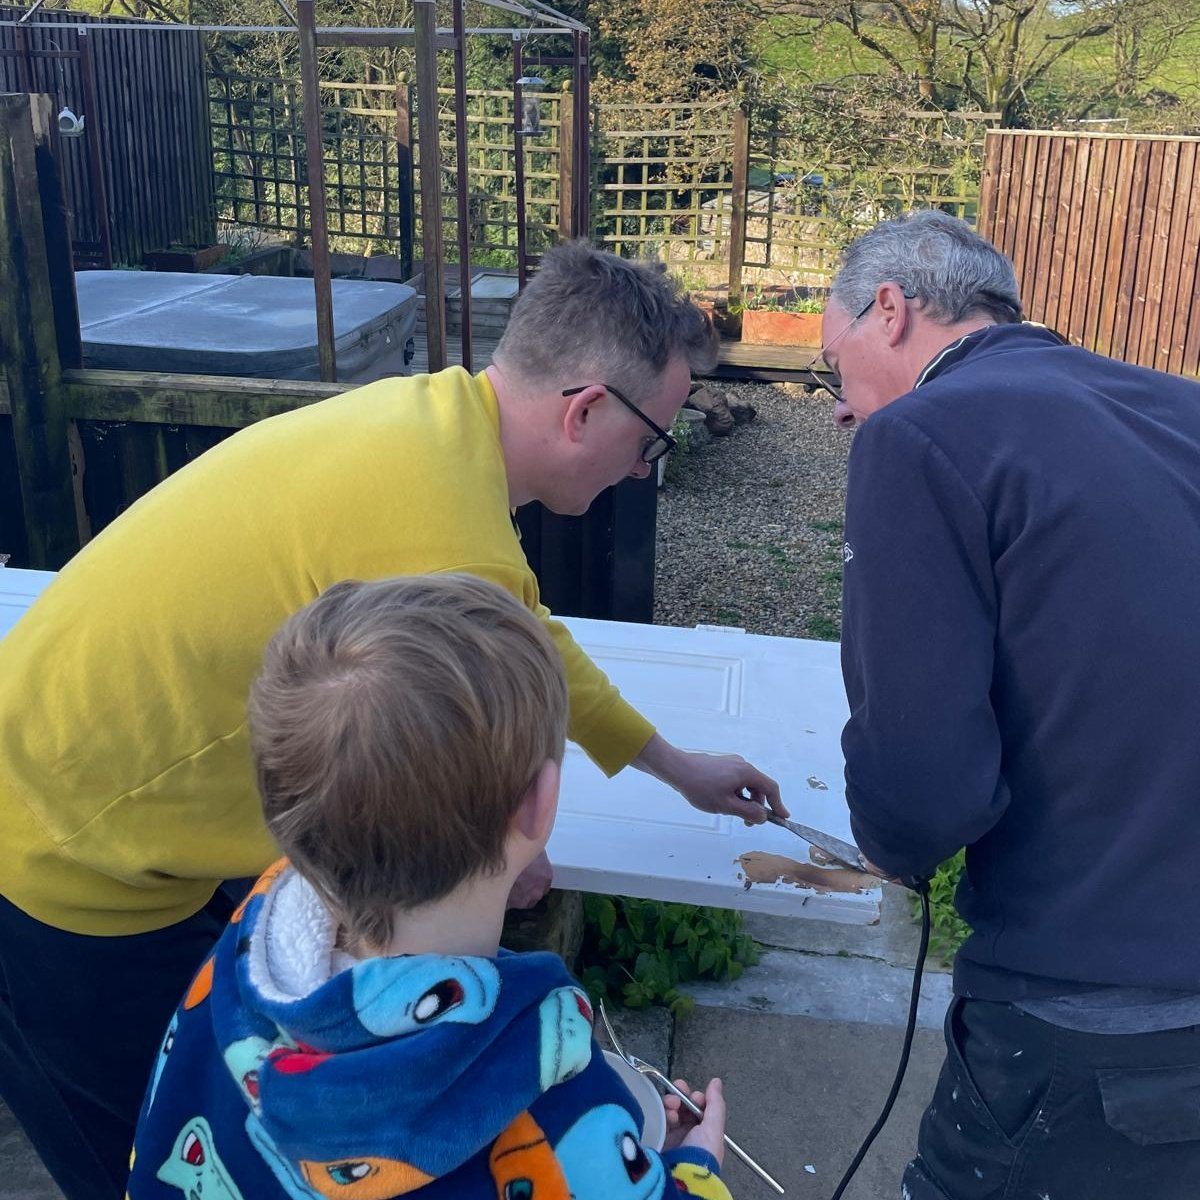 It's Tuesday so there's a brand new ep of Rural Concerns waiting for you! To celebrate here's a picture of 3 generations, stripping a door 🧰 podfollow.com/1734418552